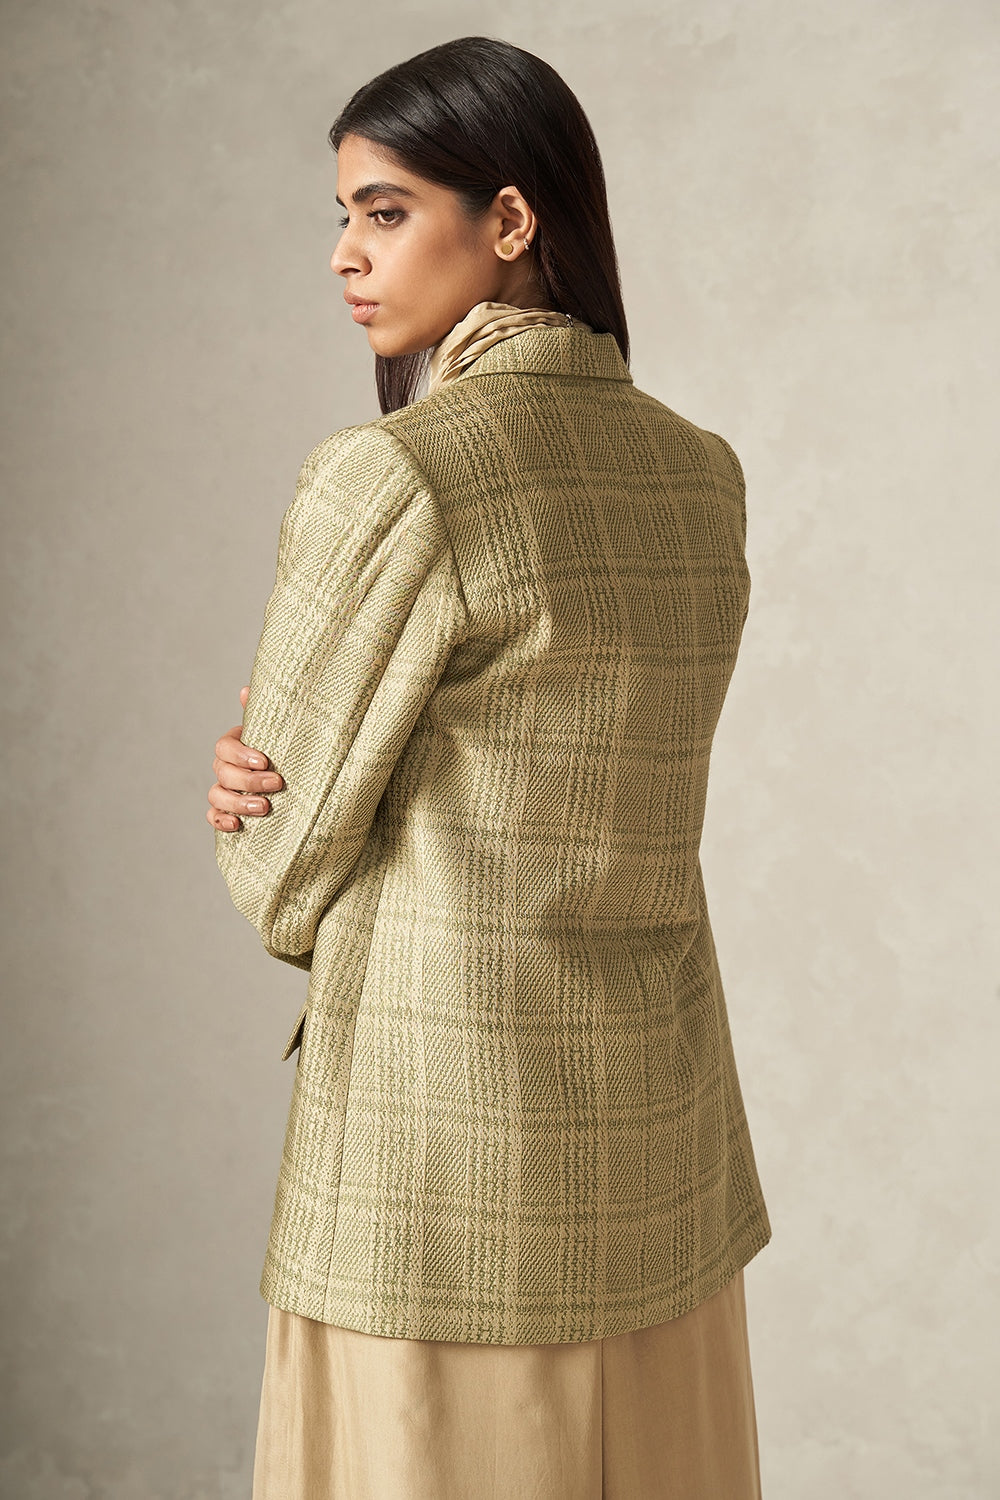 Green and Beige Pure Silk Handwoven Plaid Patterned Blazer